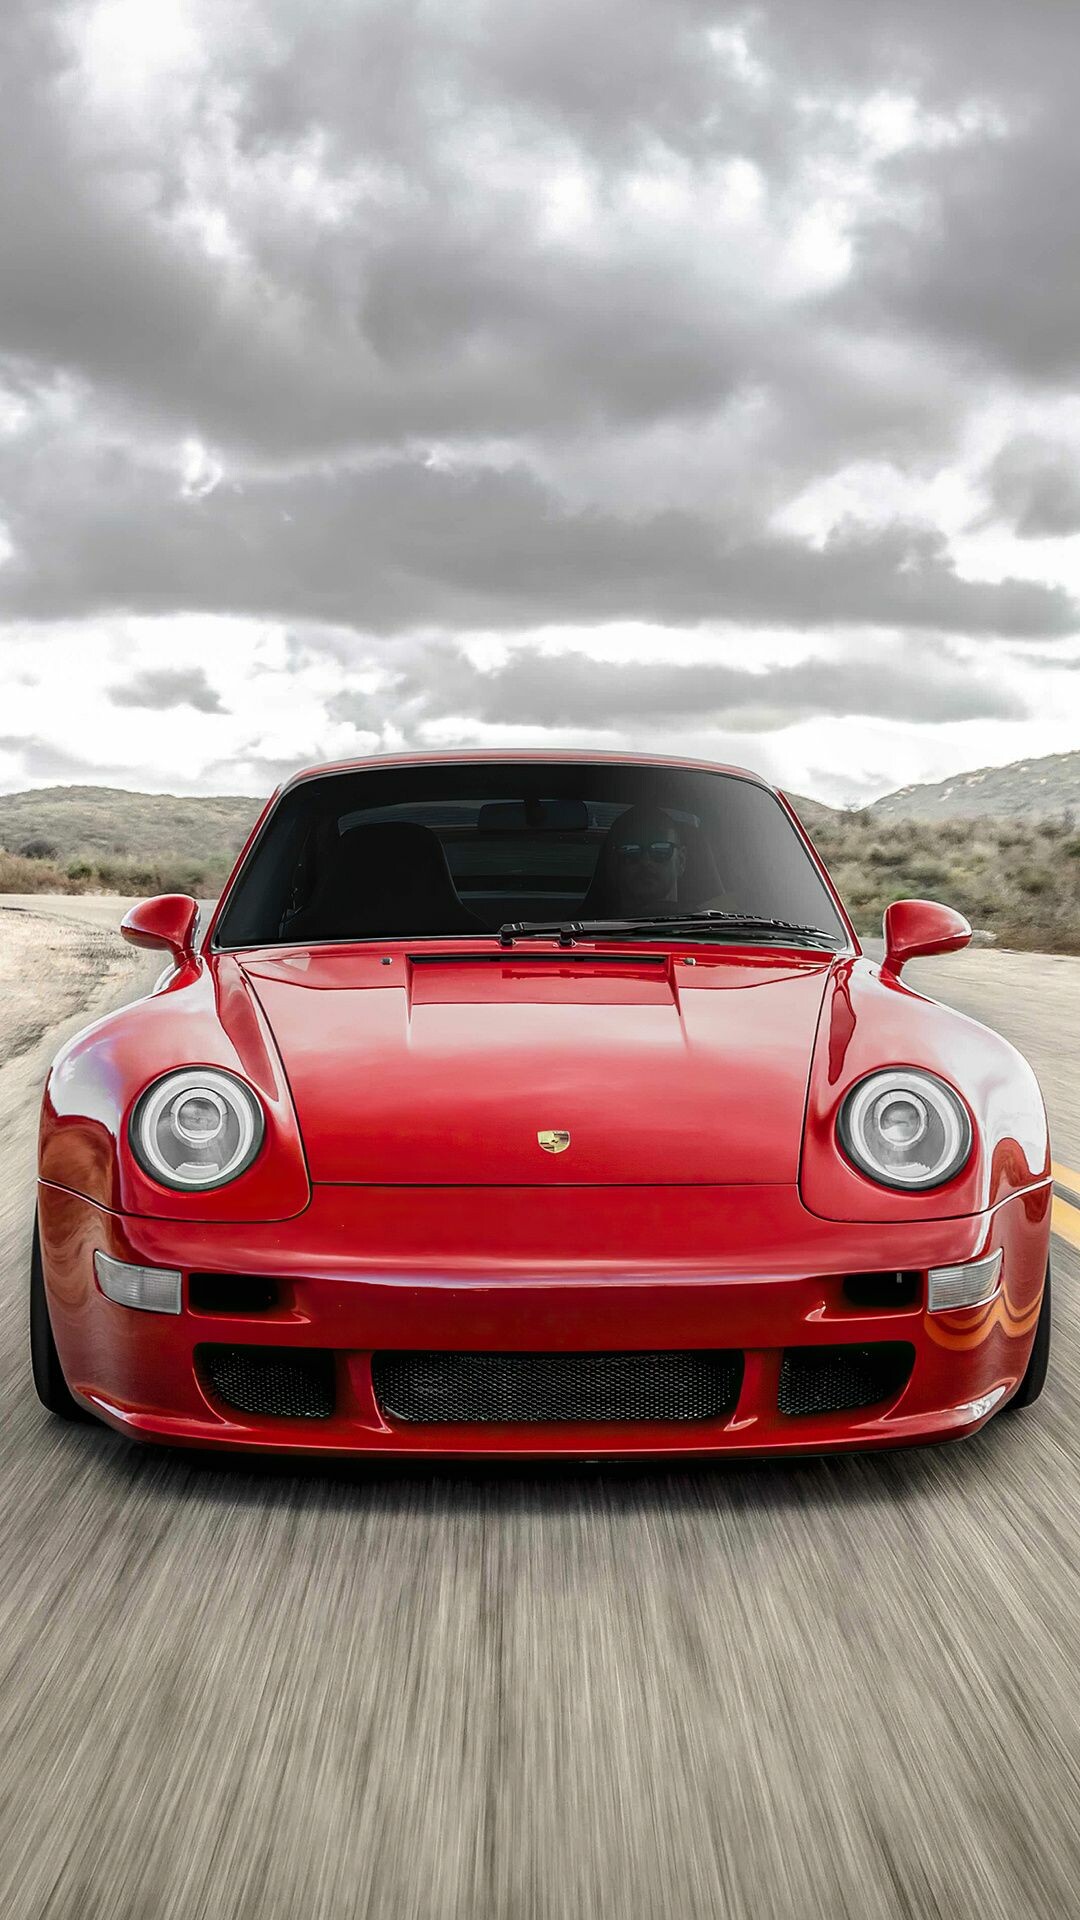 Porsche: 993, Every part of the car was designed from the ground up, including the engine and only 20% of its parts were carried over from the previous generation. 1080x1920 Full HD Wallpaper.